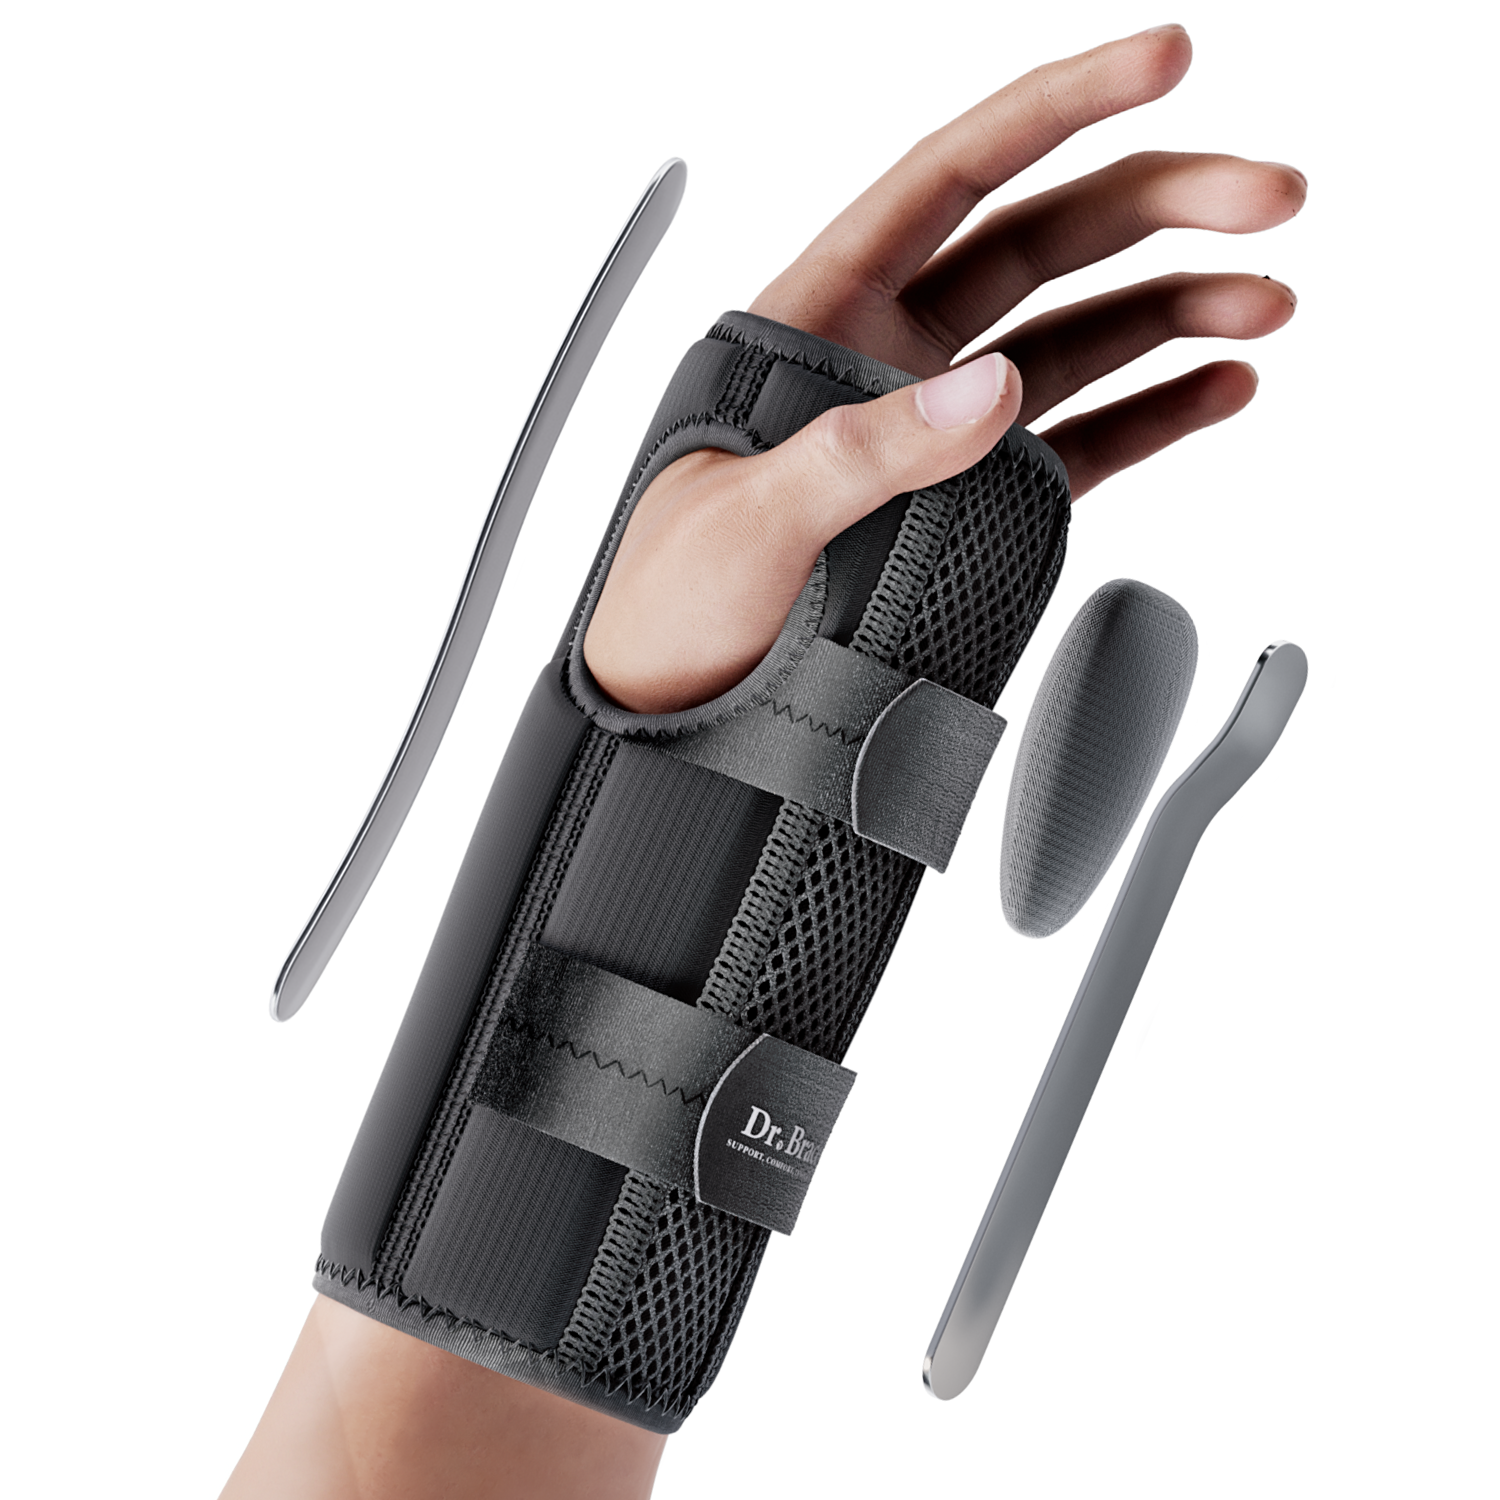 The 5 Best Carpal Tunnel Braces to Buy in 2019